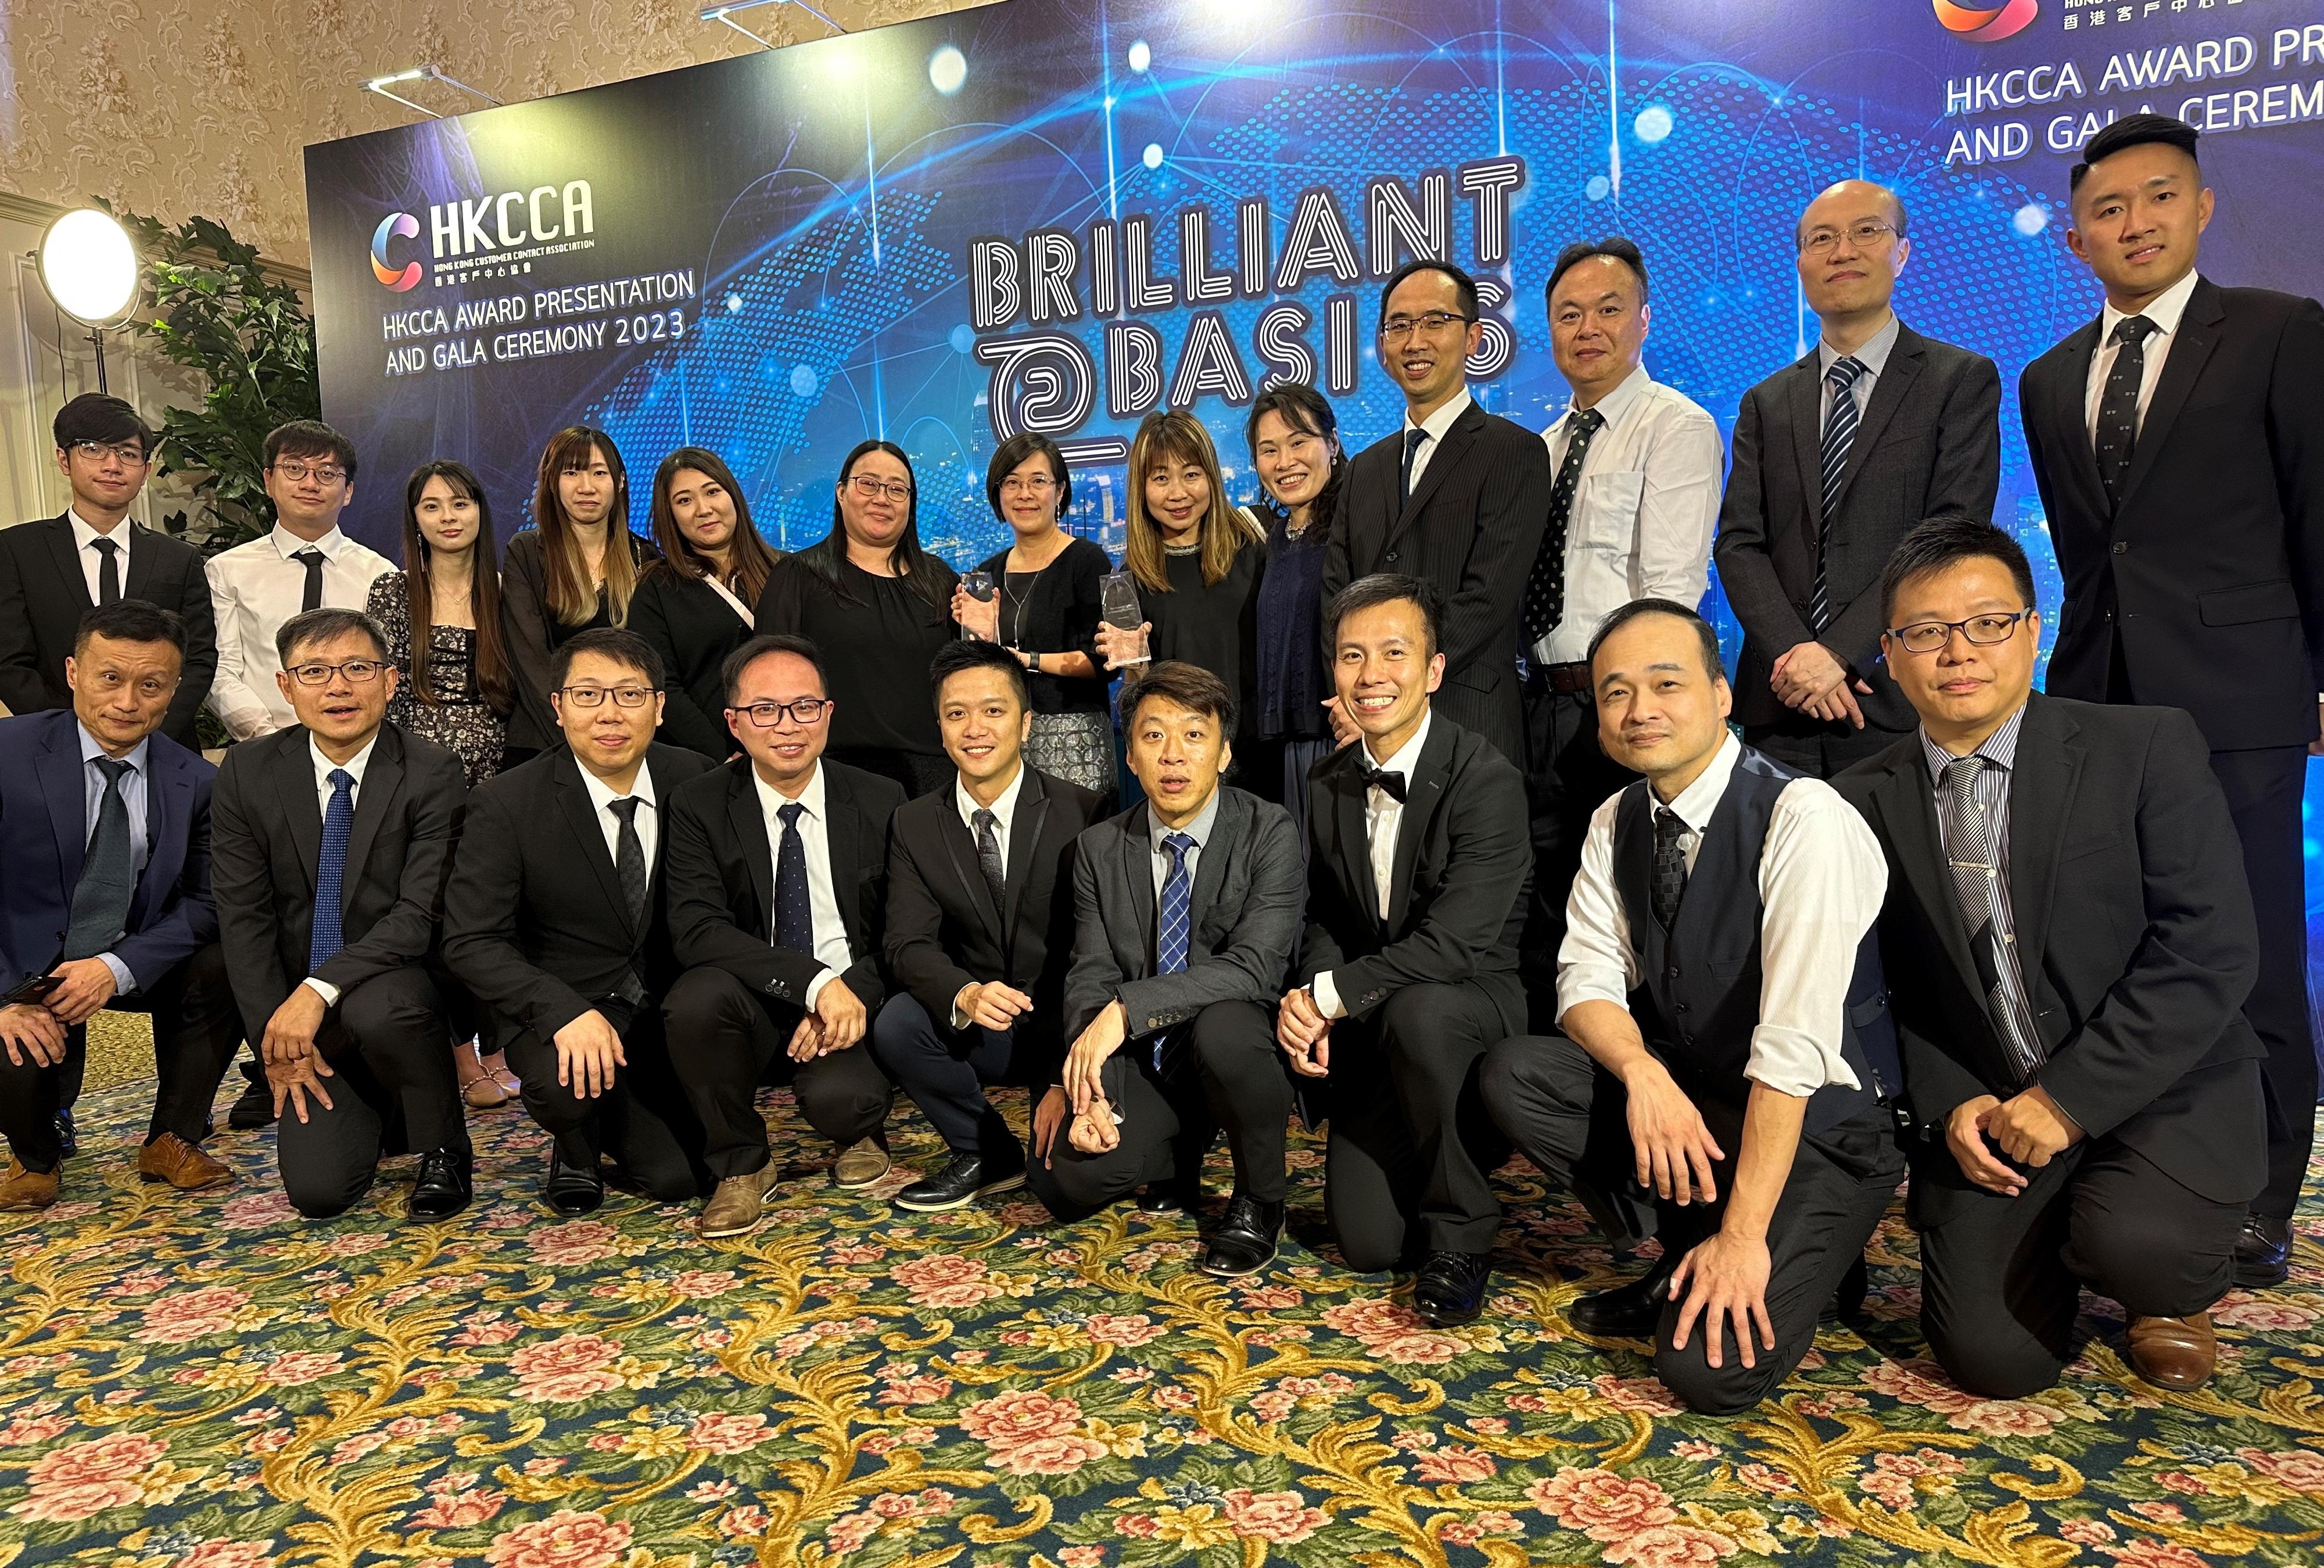 1823 received the Silver Award for Best Customer Centre in Technology Application and the Bronze Award for Best Customer Centre in Digital Transformation at the 24th Hong Kong Customer Contact Association Awards Ceremony. Photo shows the 1823 team after receiving the awards.